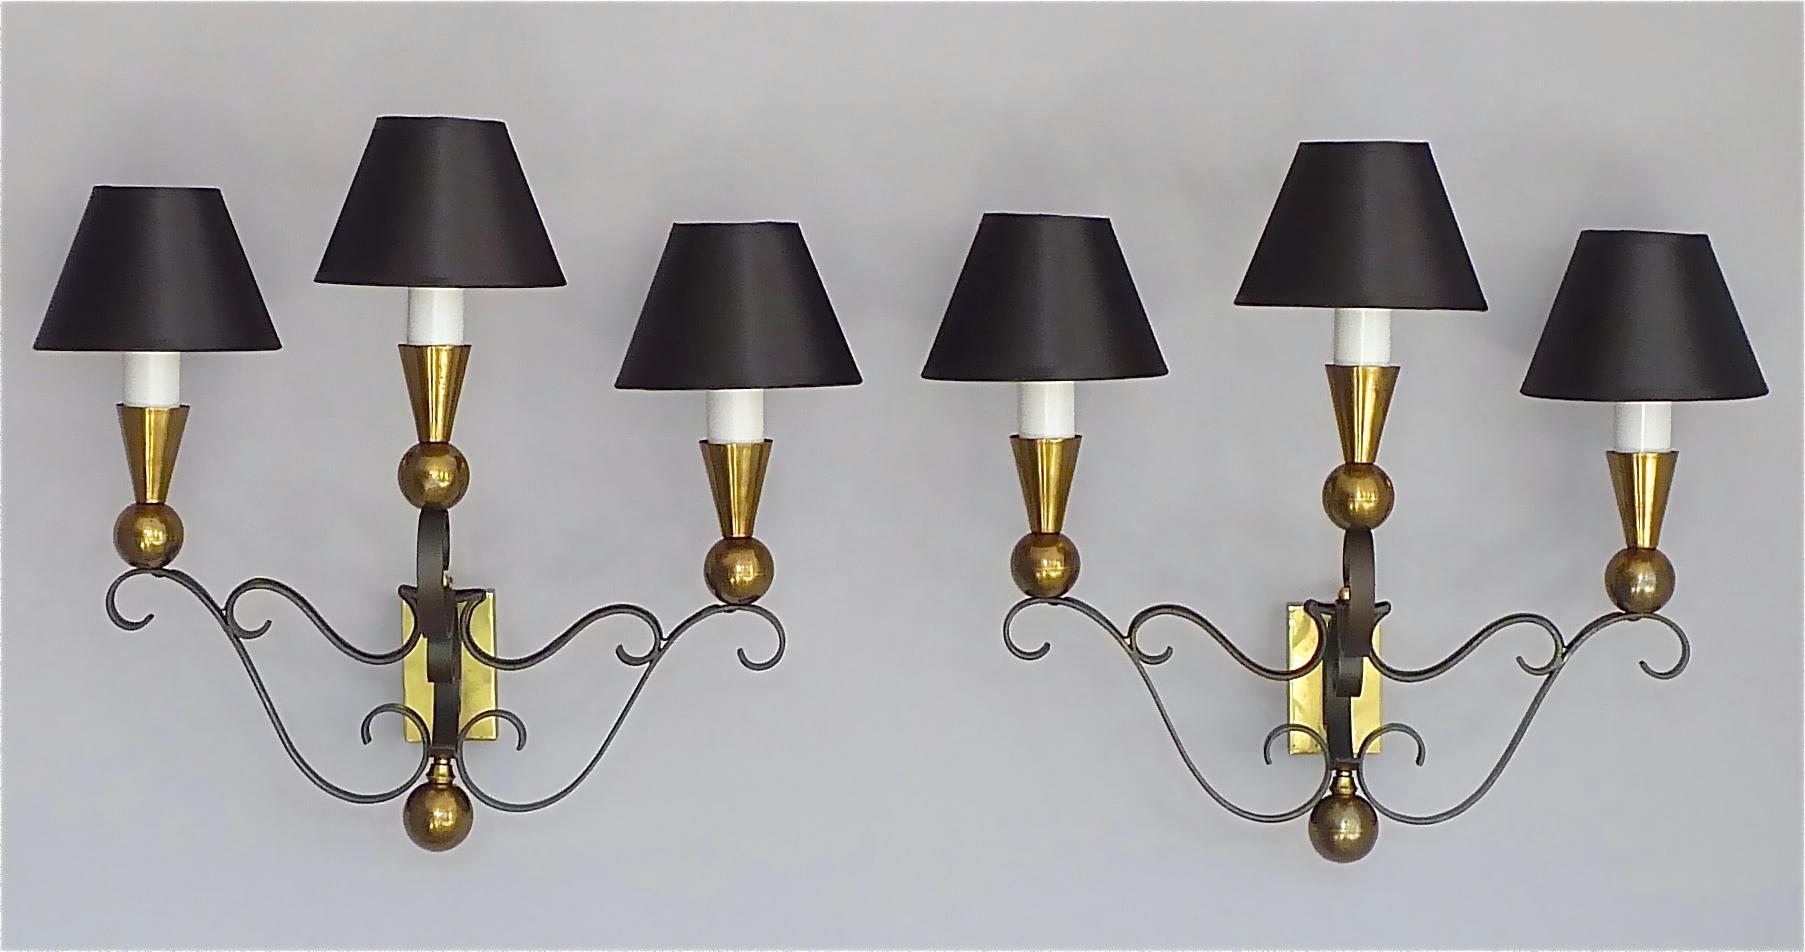 Amazing and rare set of three french Gilbert Poillerat or Jacques Adnet Style wall lights, France around 1940s to 1950s. Two large 3-arm sconces measure each 46 cm / 18.11 inches wide, 42 cm / 16.54 inches tall and 23 cm / 9.06 inches deep, one